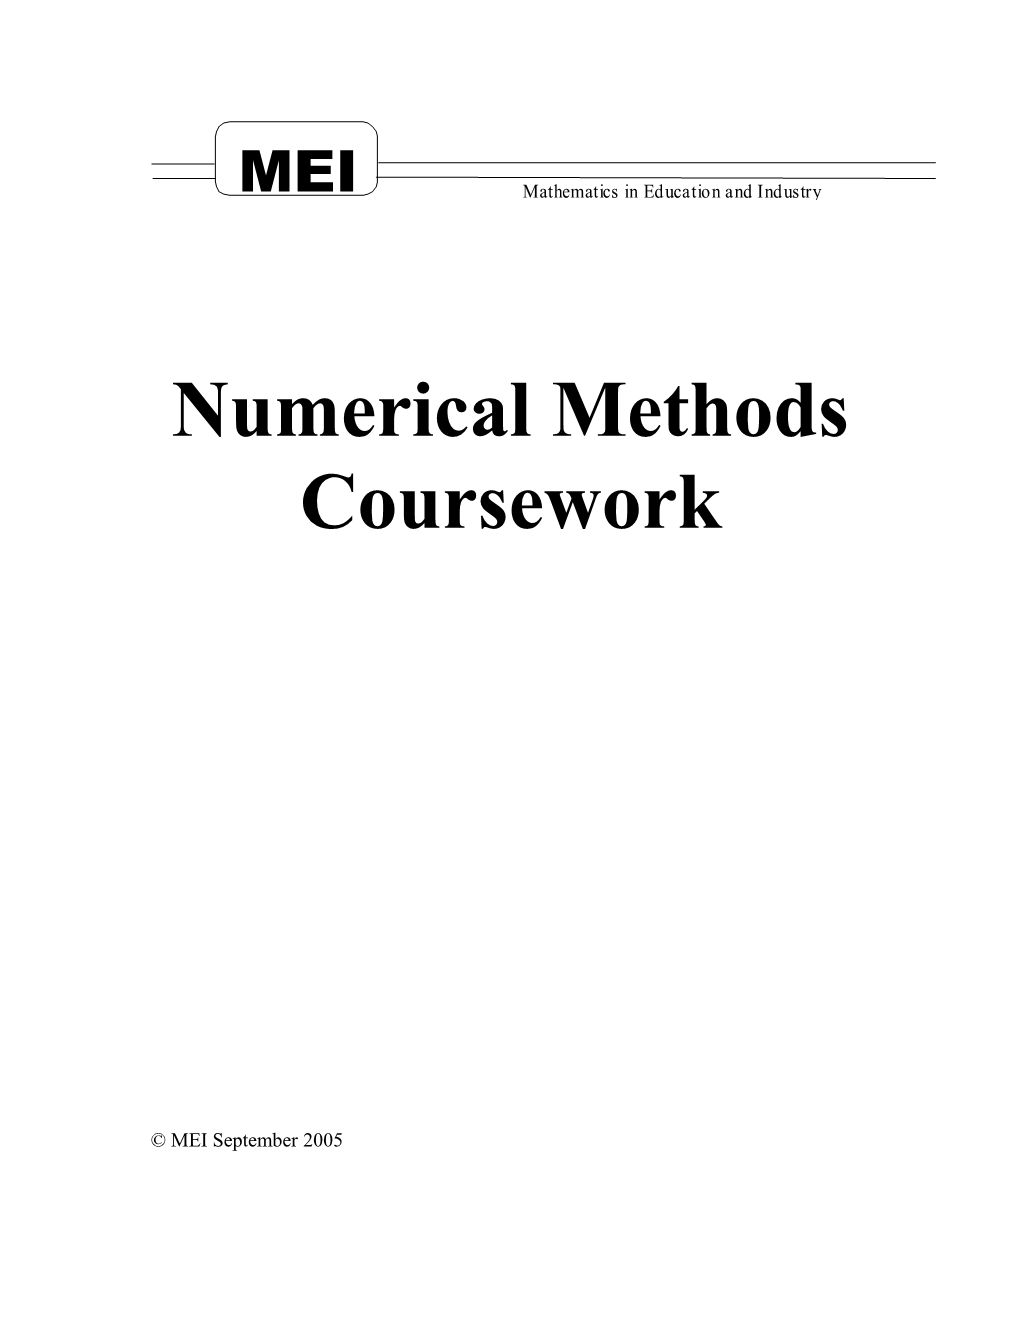 Coursework for Numerical Methods